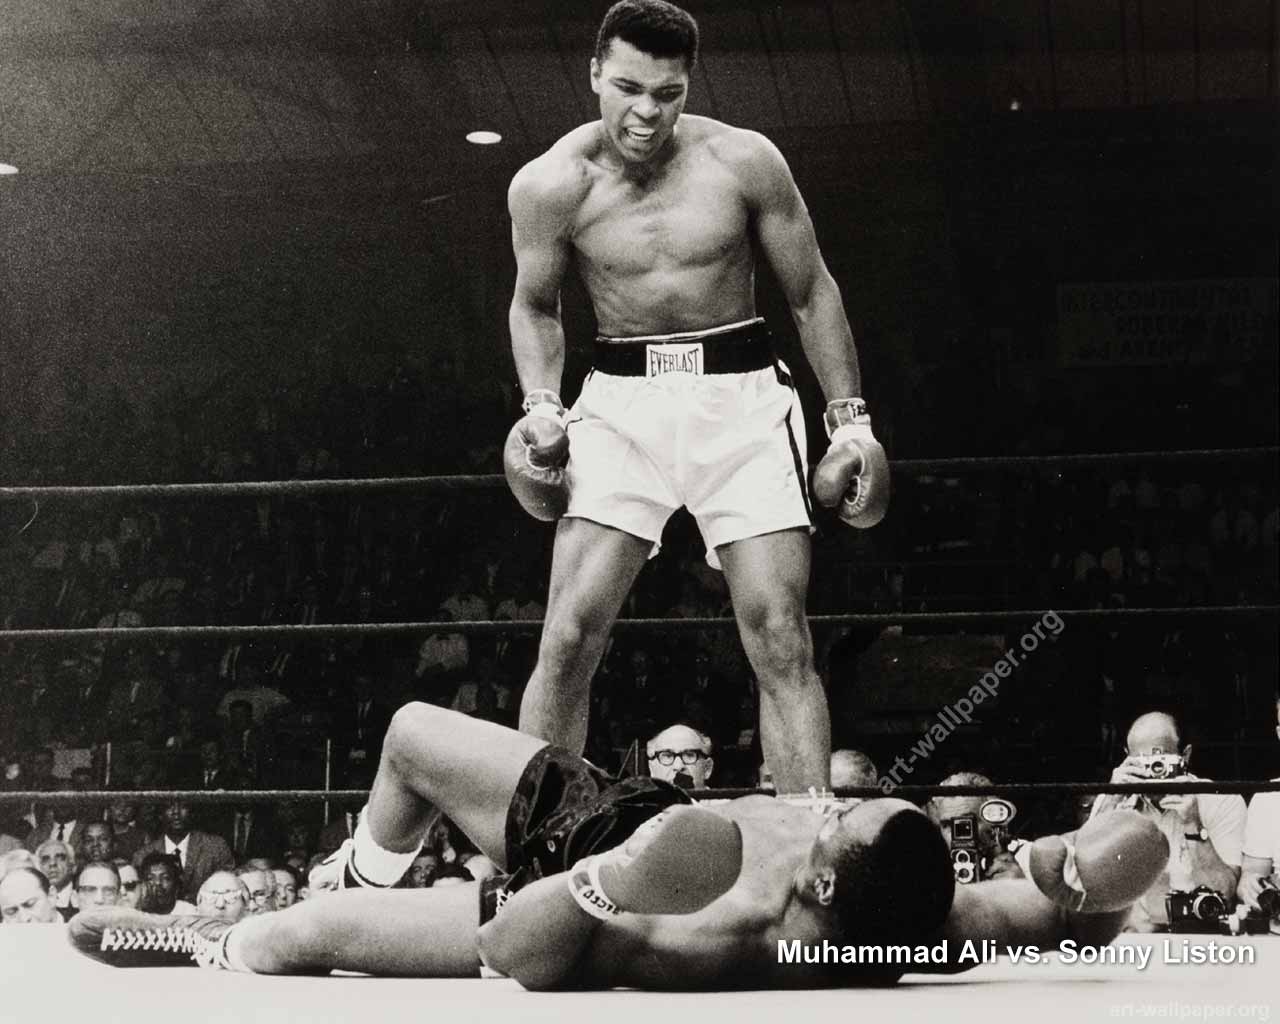 Muhammad Ali vs Sonny Liston Poster and Wallpaper Pictures 1280x1024